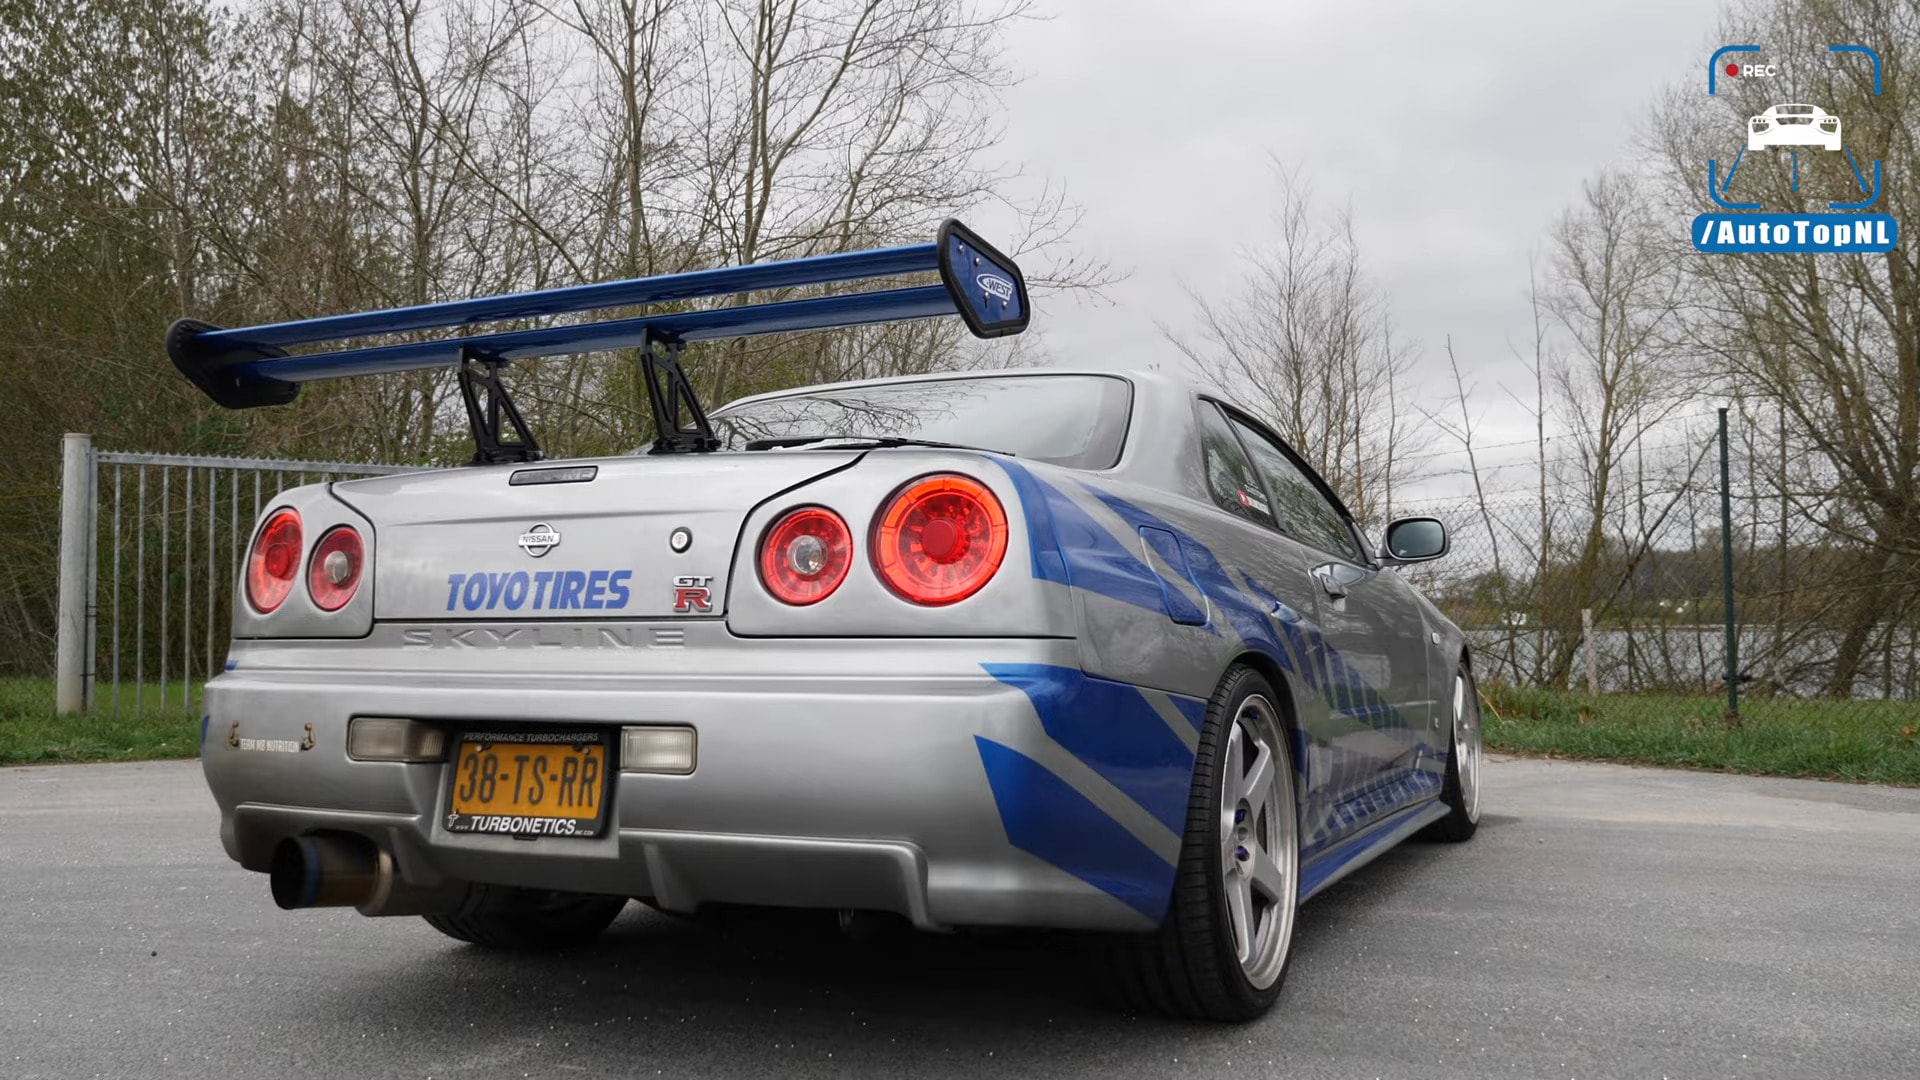 Brian O'Conner's 450-HP Nissan R34 Skyline GT-R Visits Europe, Gets Playful